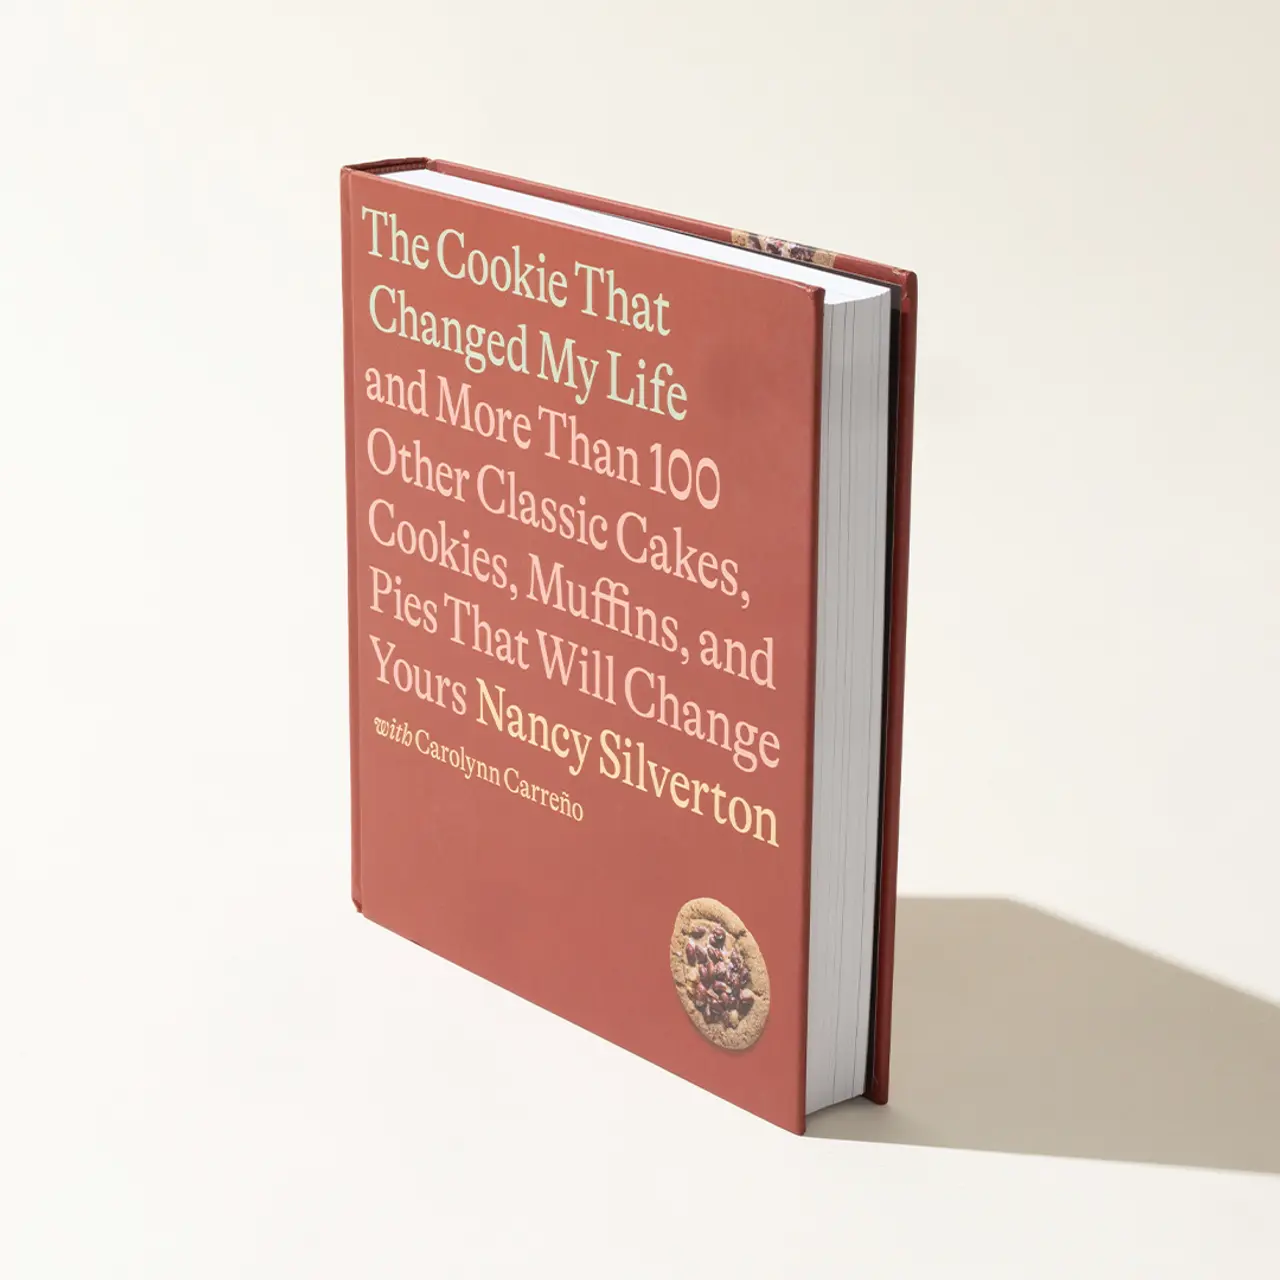 A red cookbook titled "The Cookie That Changed My Life" by Nancy Silverton is standing upright against a white background with a shadow to its right.